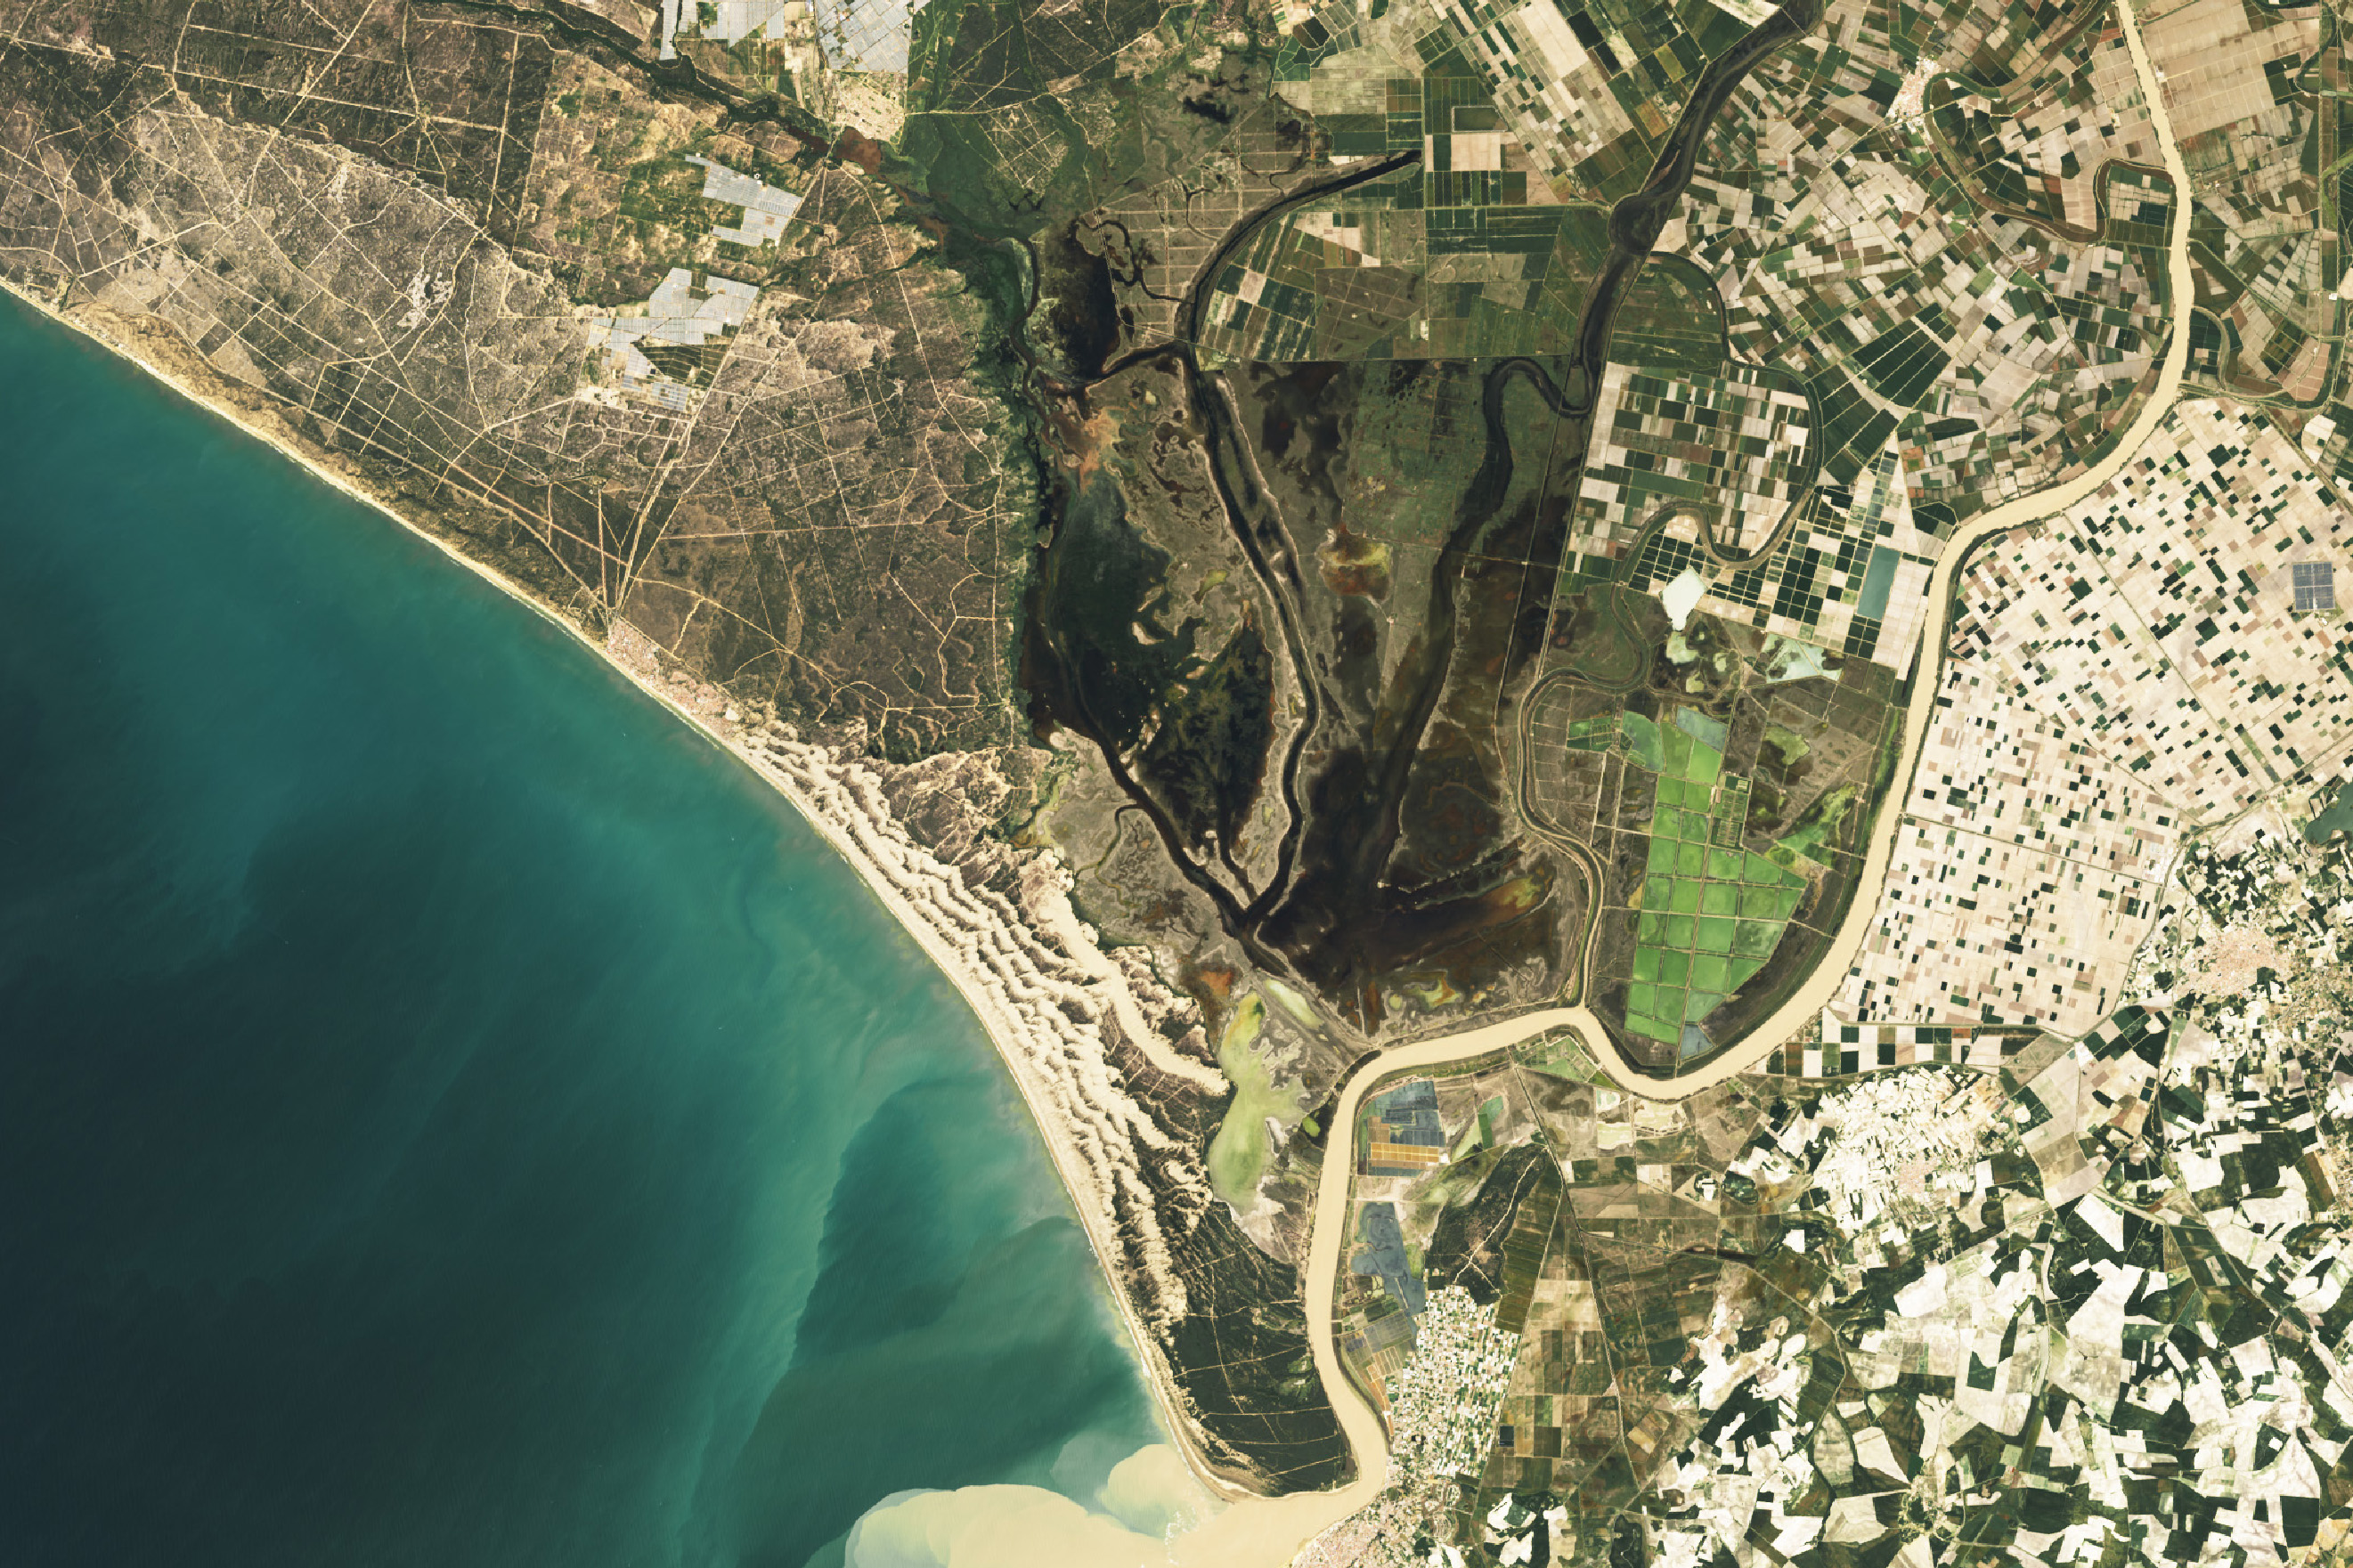 satellite photo of coastal landscape with blue green water in the lower left. in the top left seems to be more arid regions. along the top and right are grids of farmland. A river starts at the top right and empties into the edge or the large body of water contributing significant tan colored eddies or turbidity, centering in the image is dark colored swampy wetland